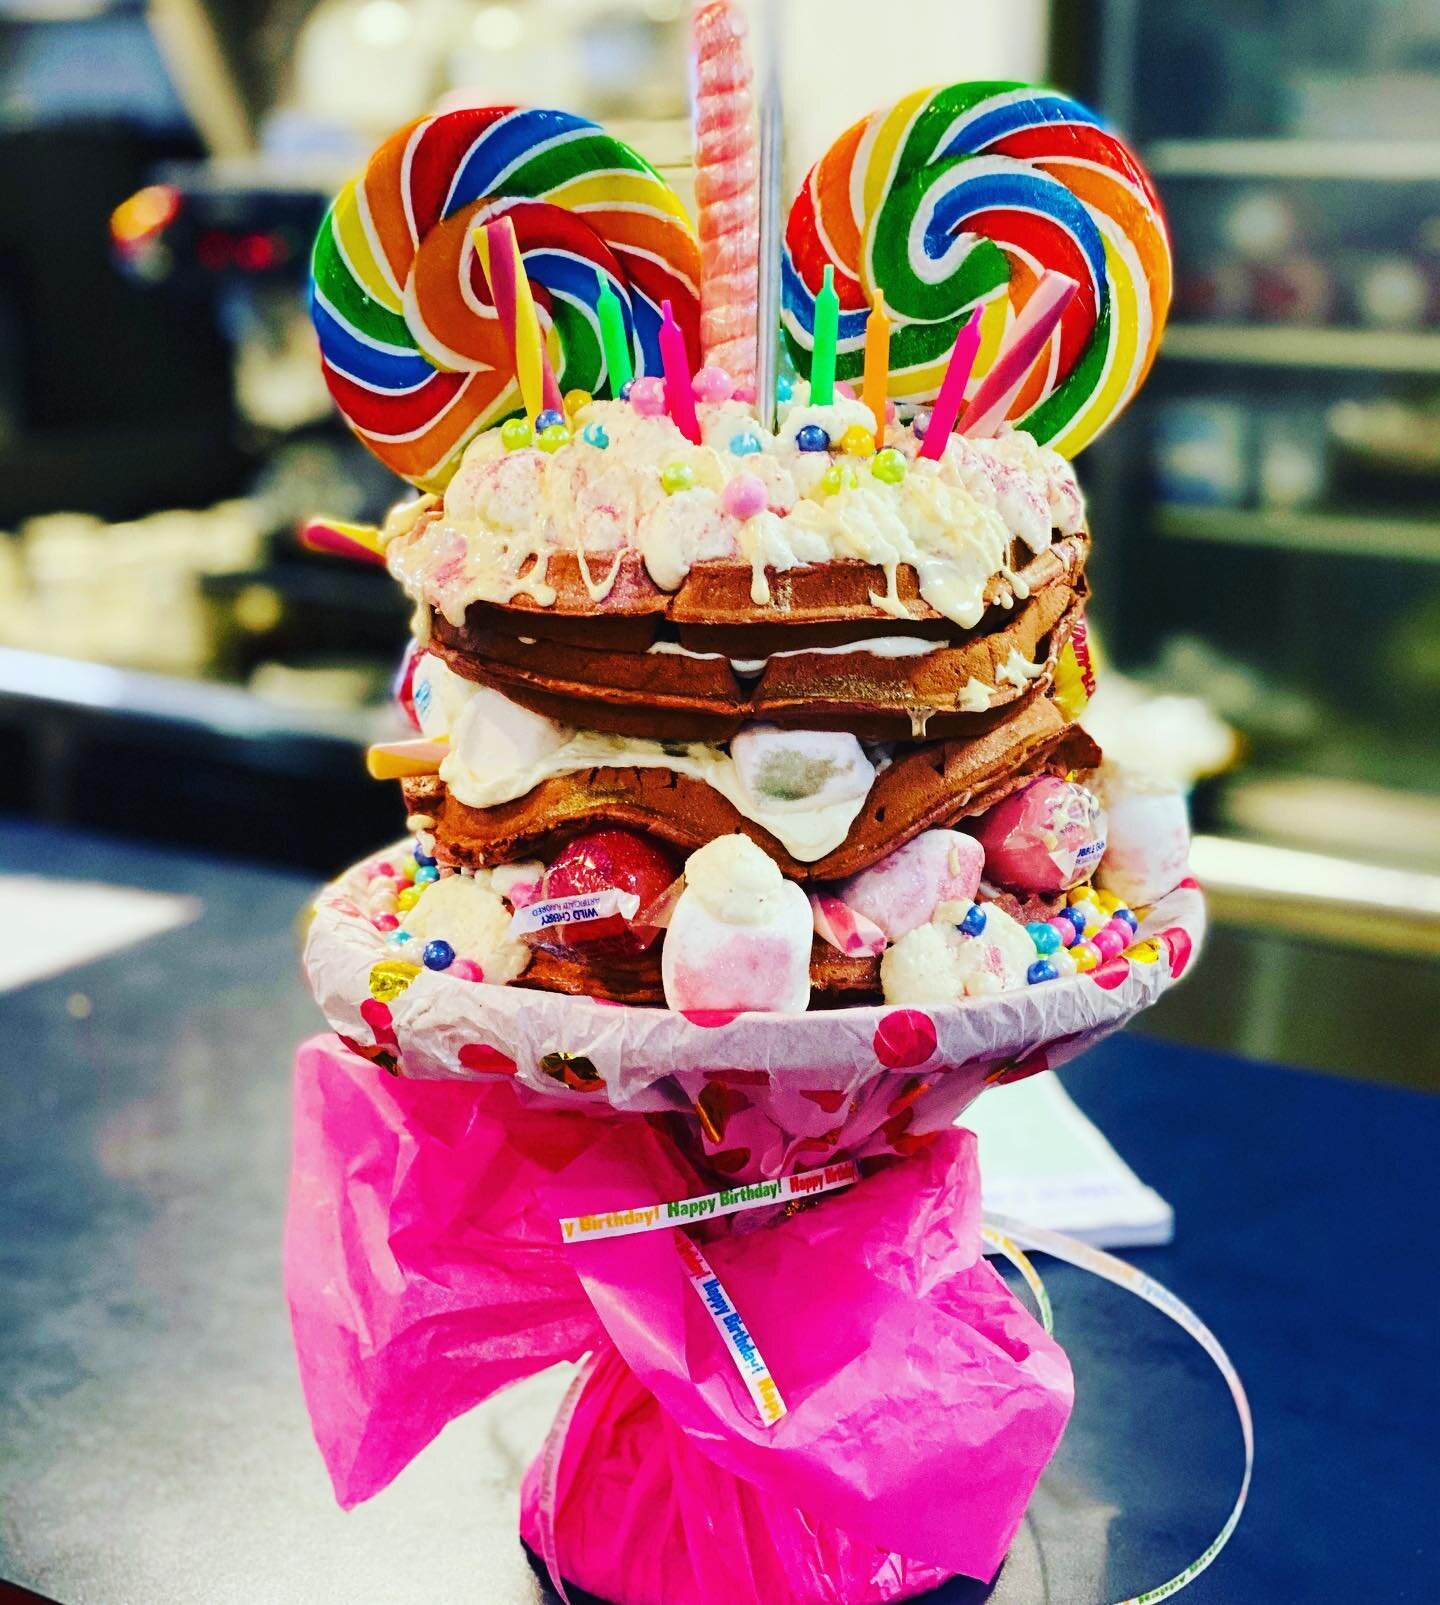 Introducing....
&ldquo;Red Velvet Waffle Bday Cake&rdquo;

Come celebrate your next bday with us and have your very own Montclair Diner &ldquo;WAFFLE BDAY CAKE&rdquo; as seen on &ldquo;The View&rdquo; for Whoopi&rsquo;s Birthday!!!

HAPPY BIRTHDAY to